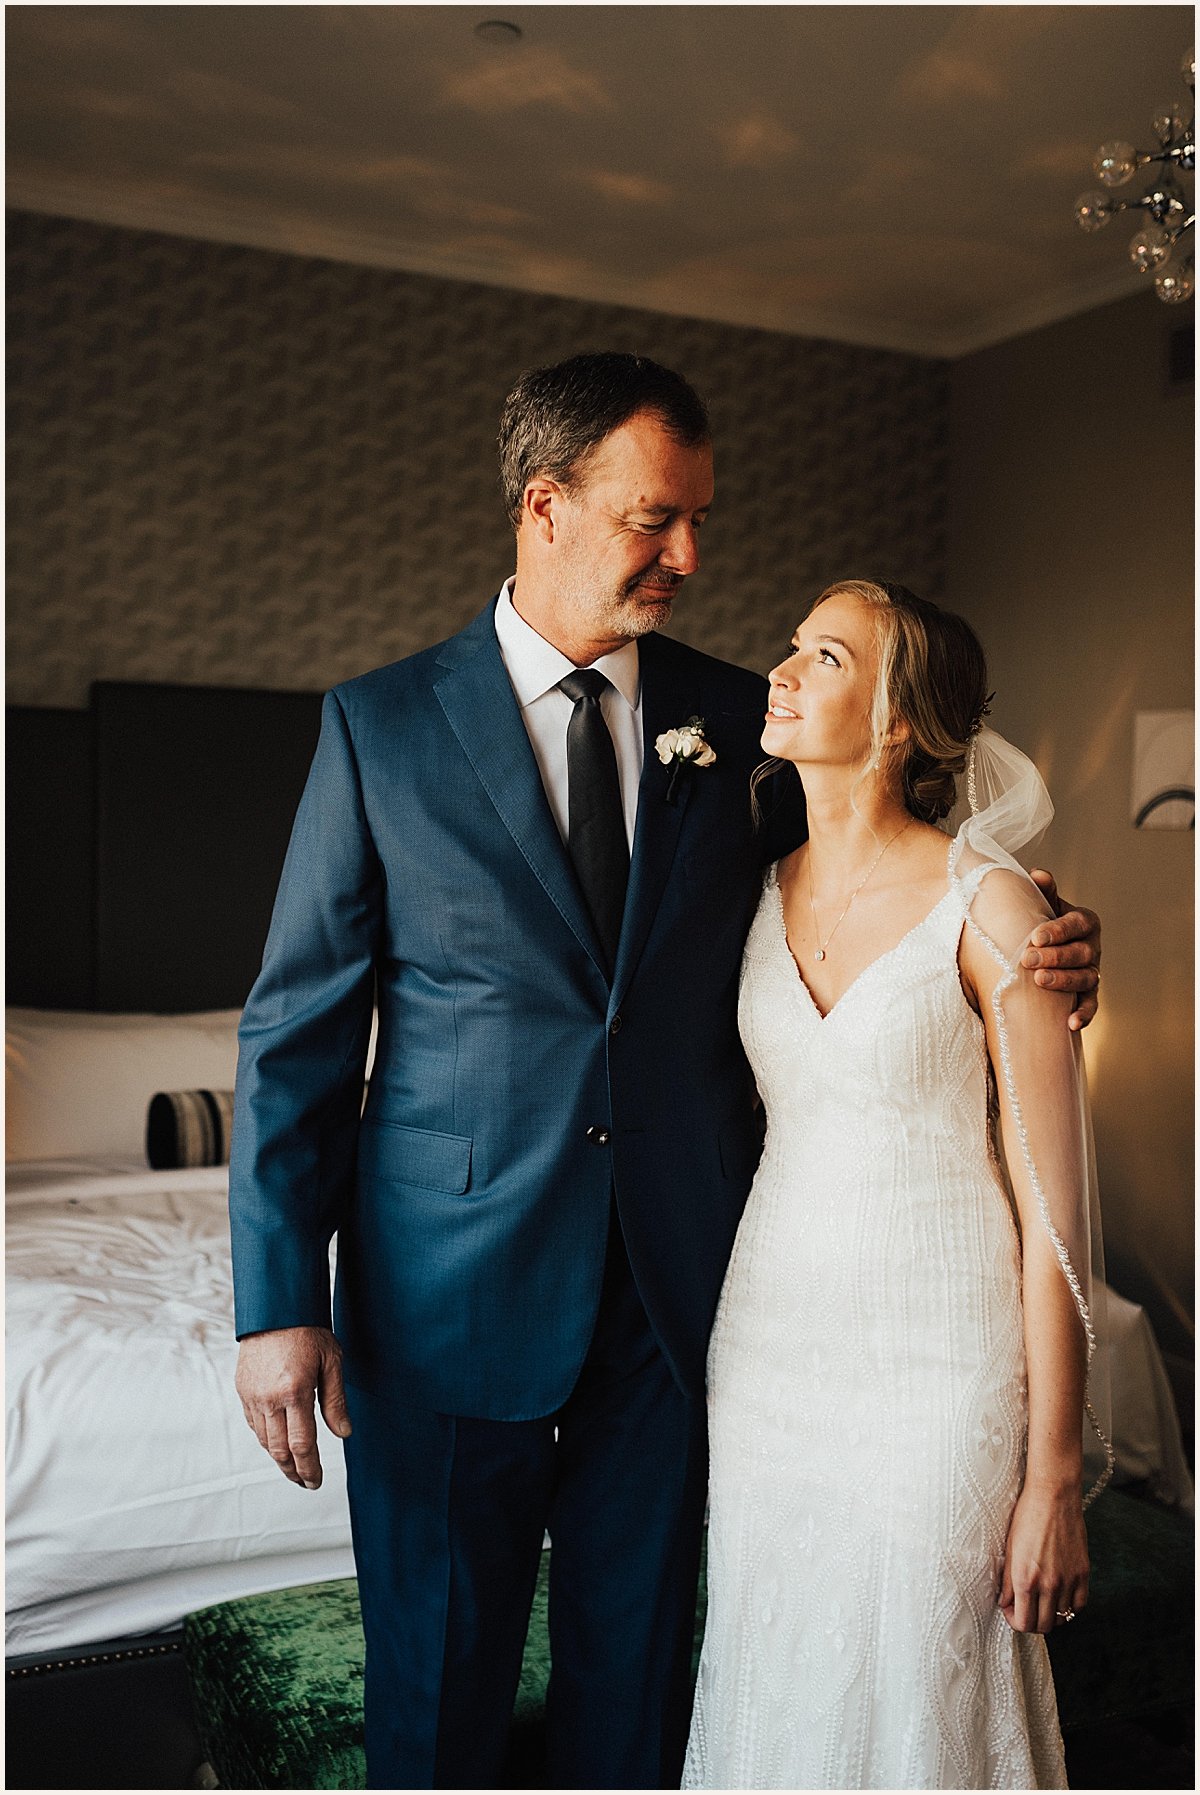 Dad and daughter on wedding day | Lauren Parr Photography